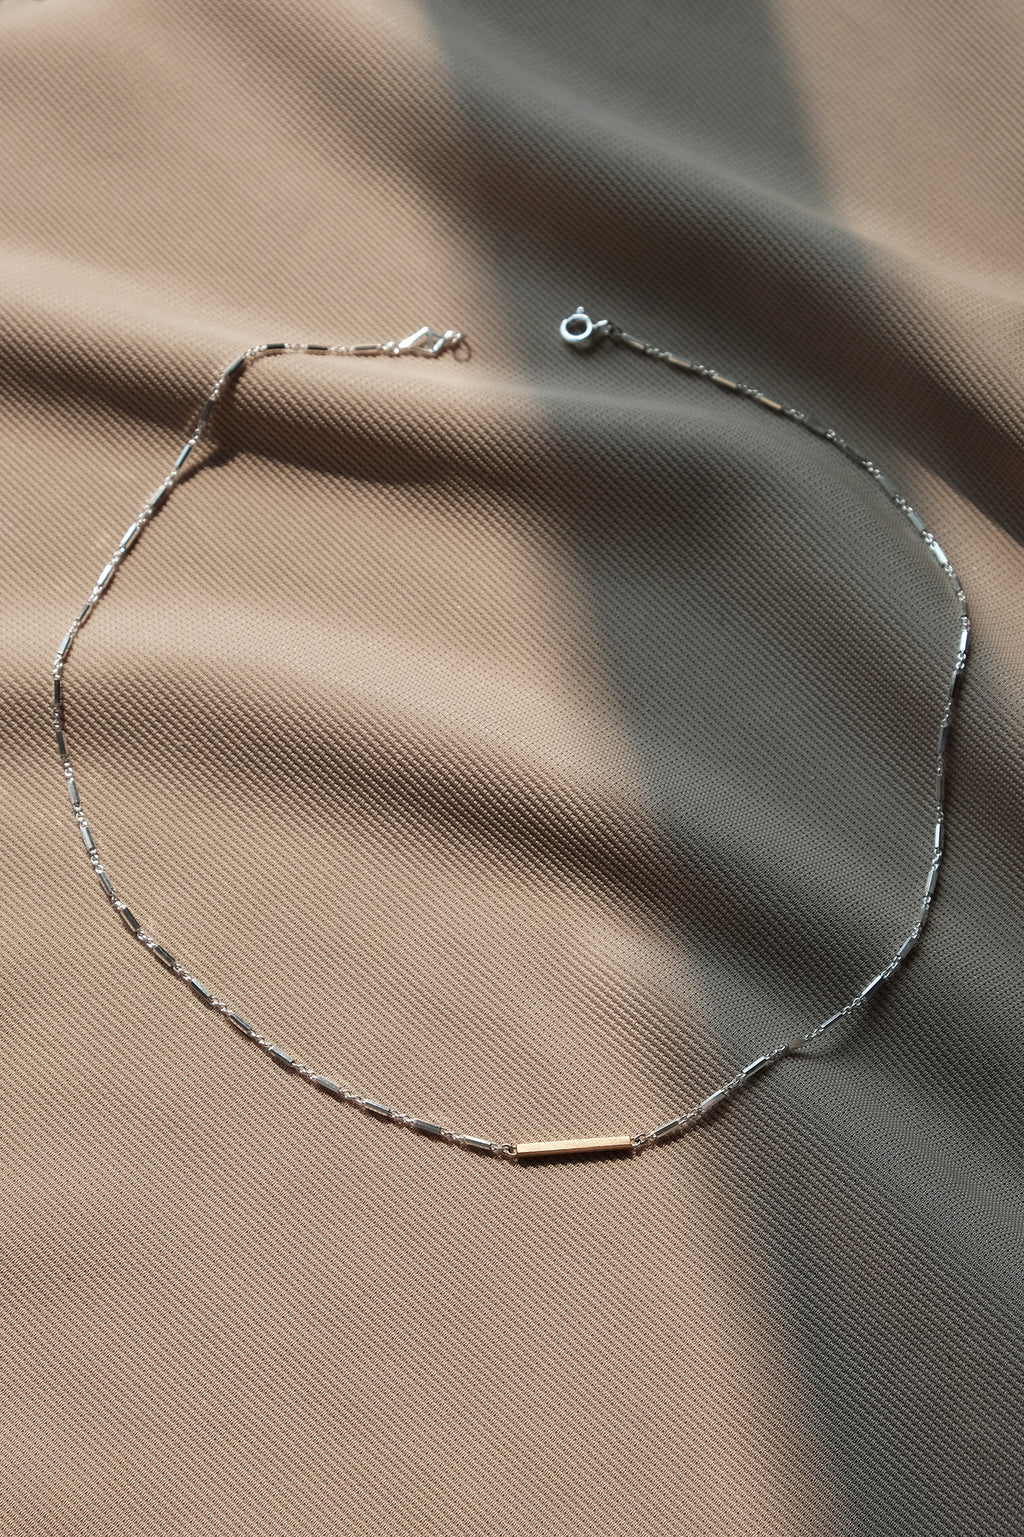 Collier barre horizontale // 2 tons